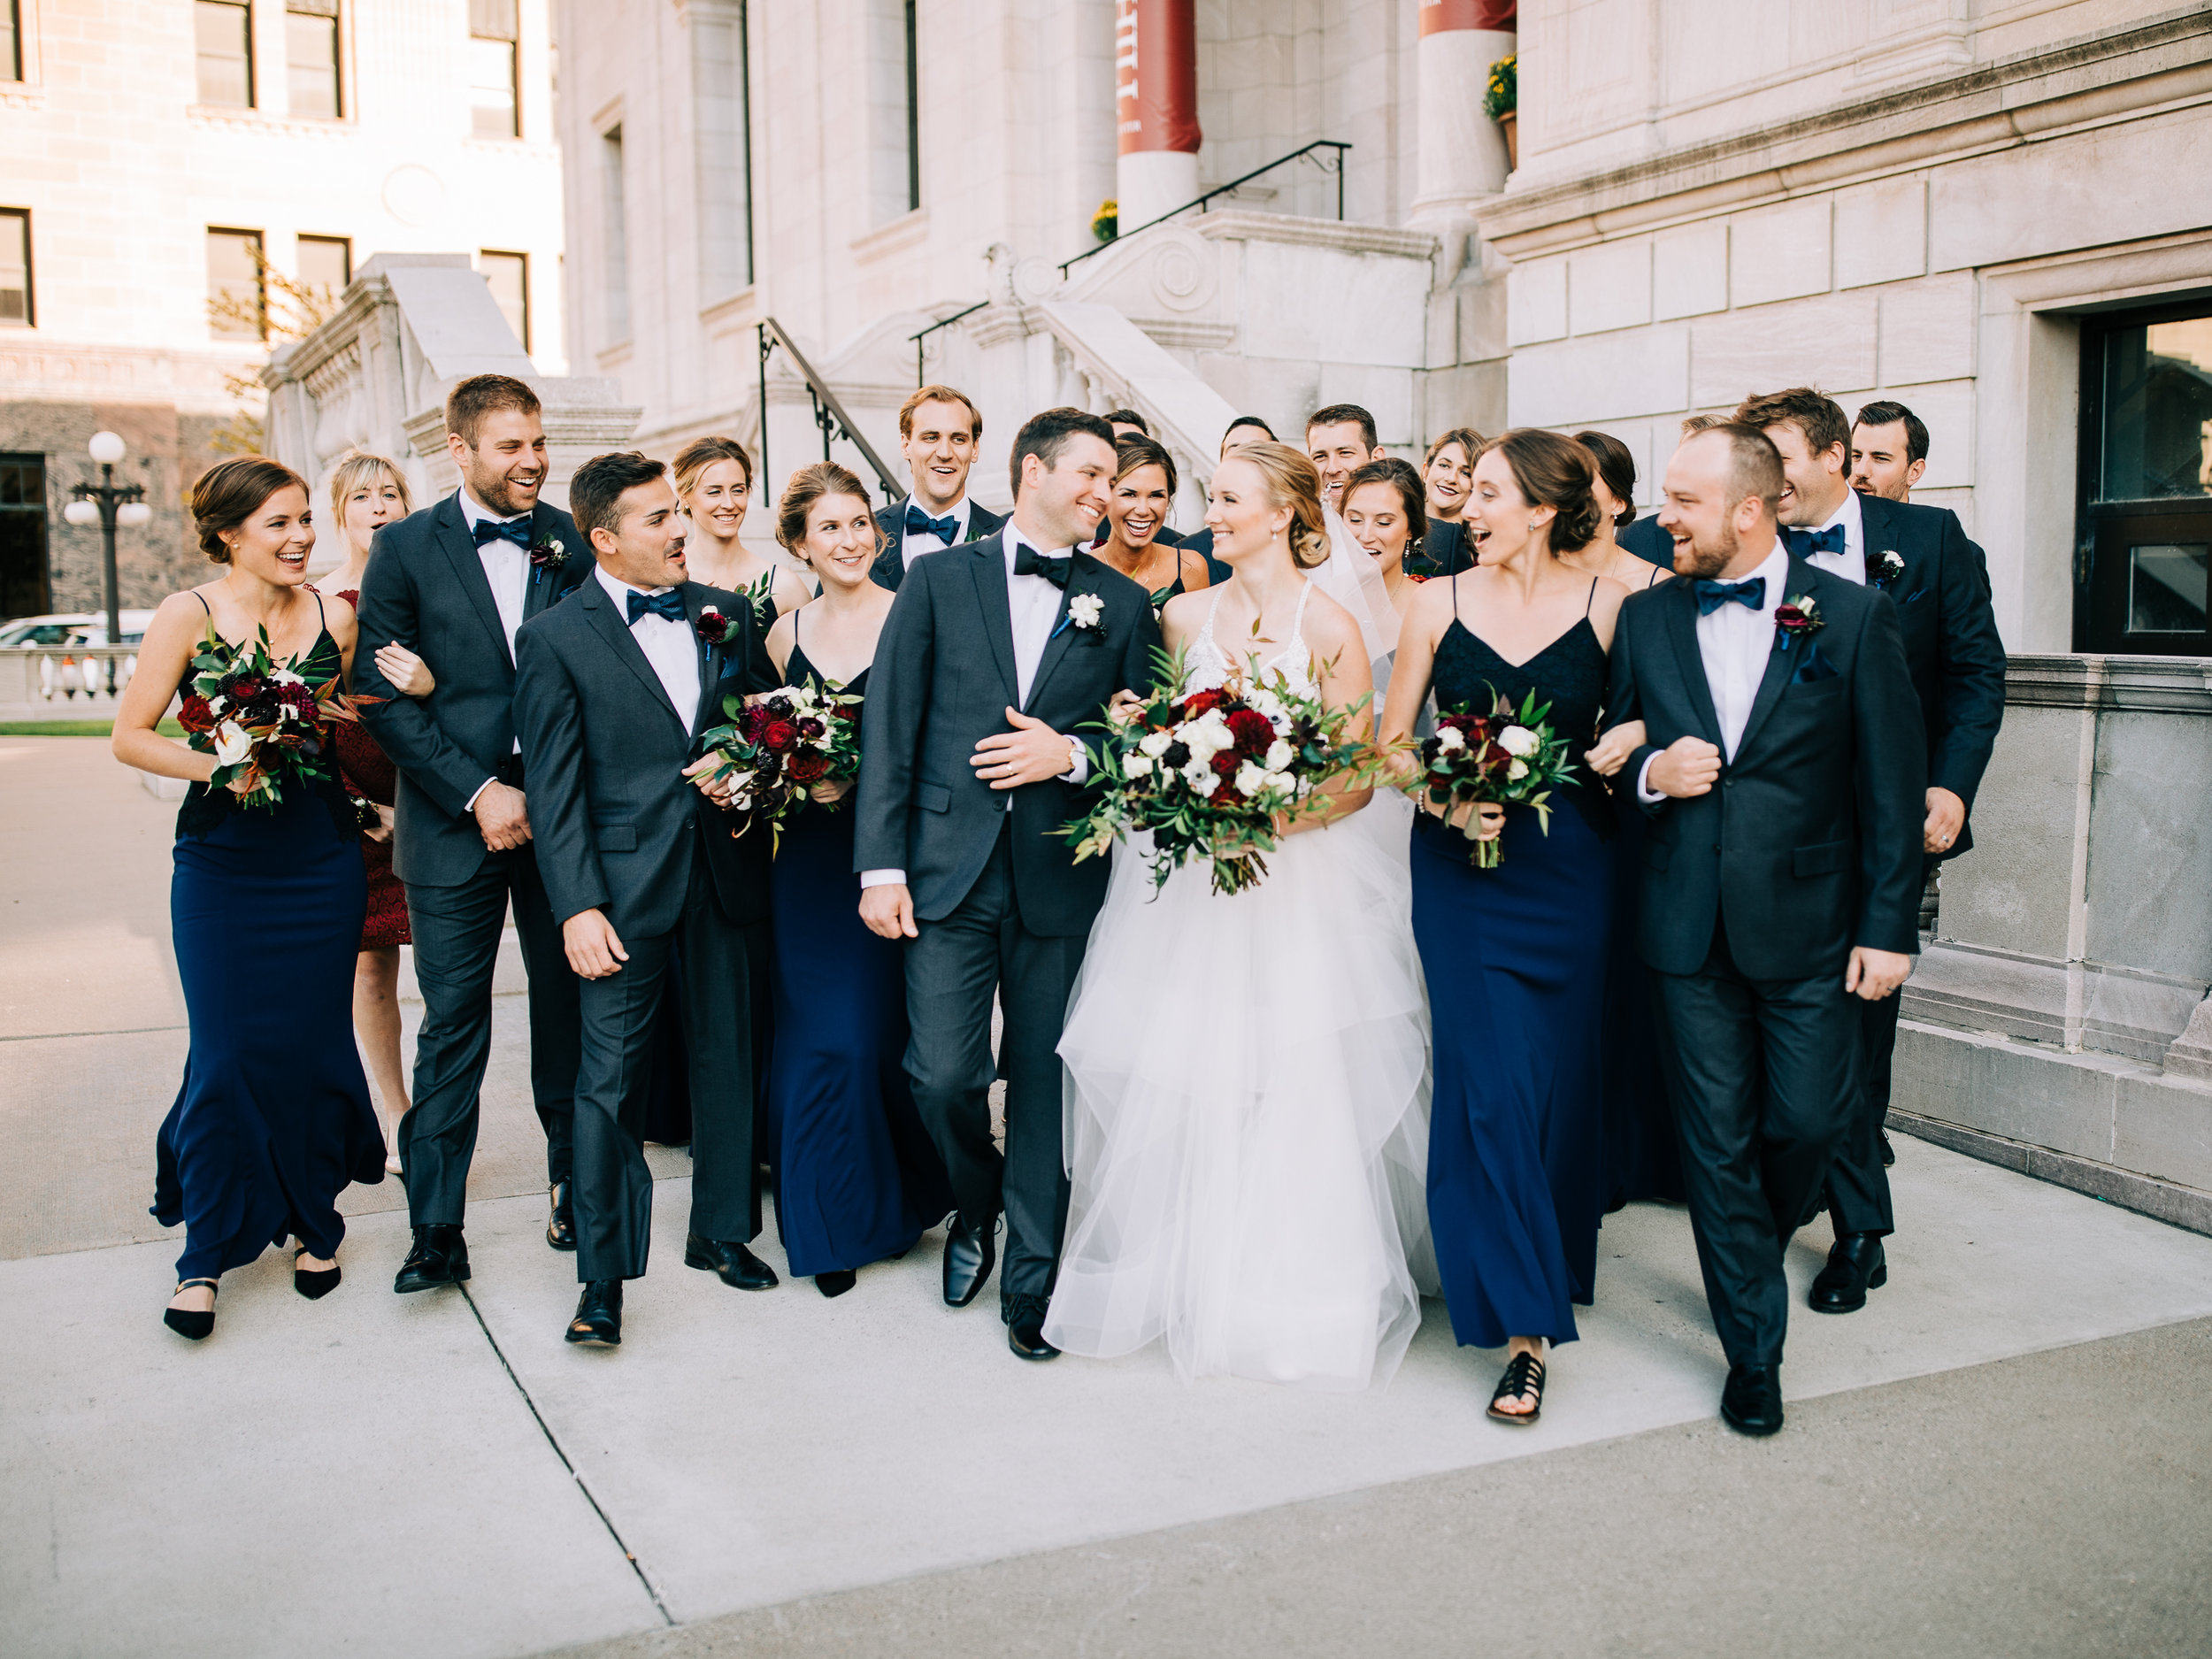 James Hill Library Wedding in Saint Paul, MN